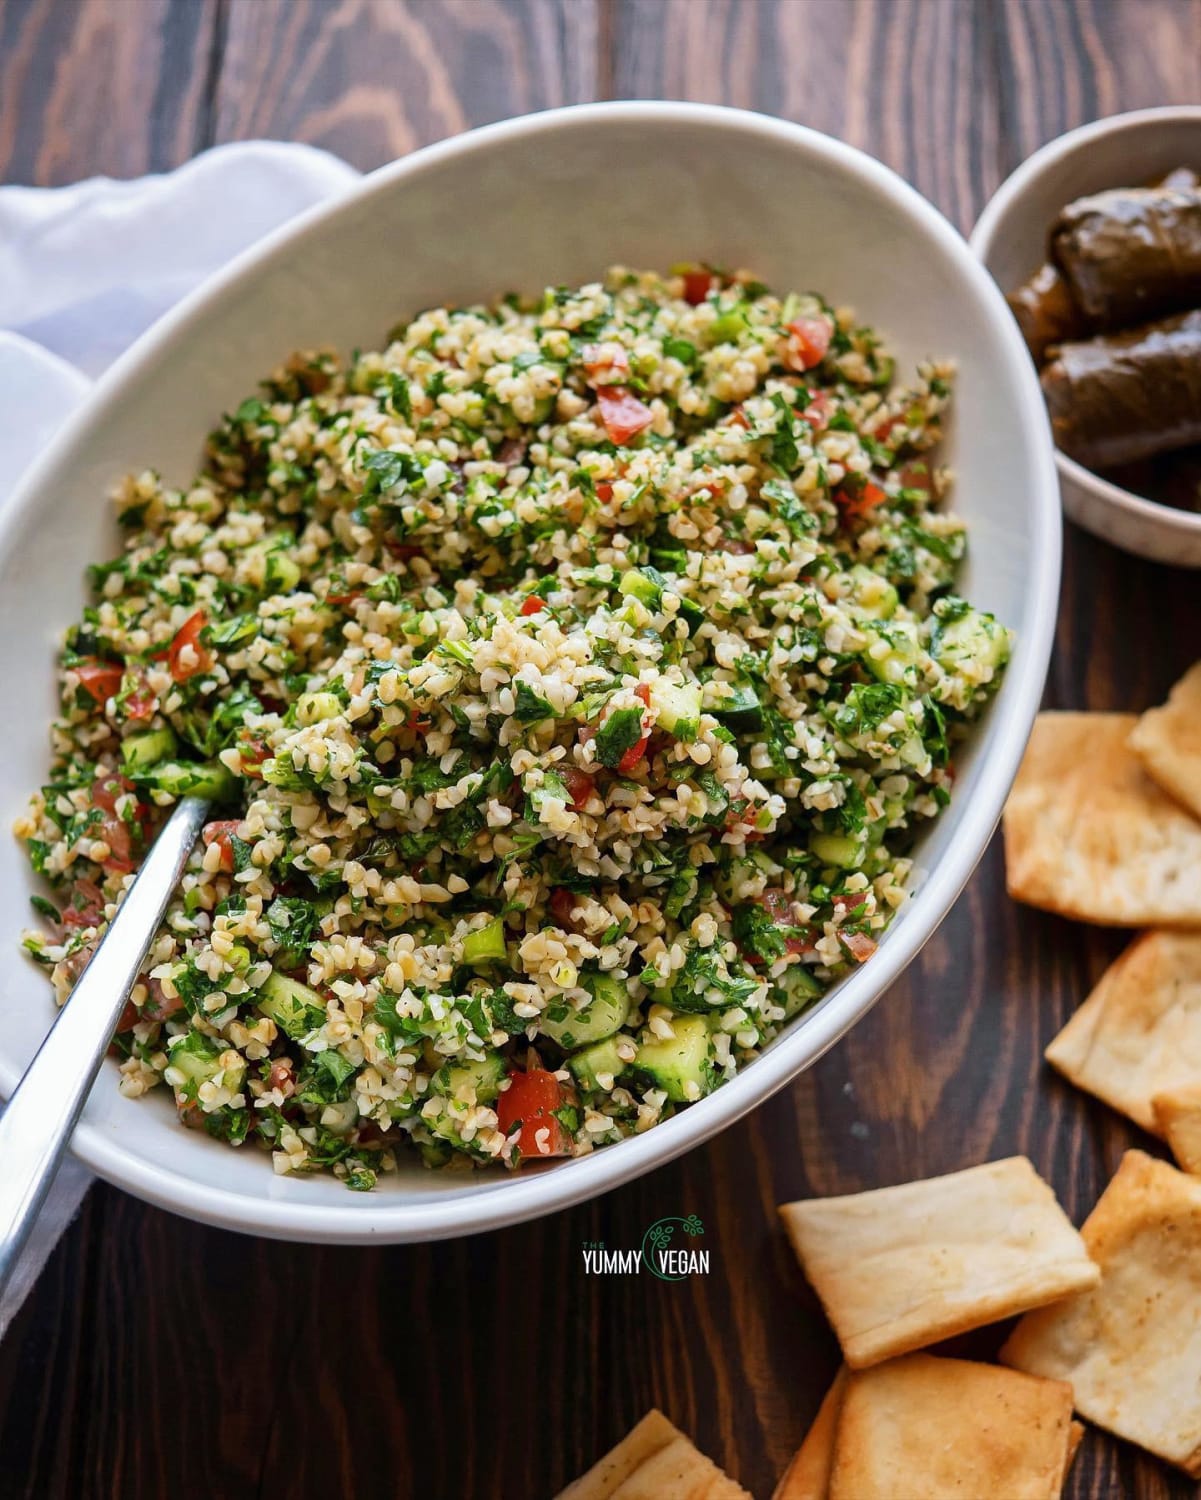 TABBOULEH inspired by the Lebanese salad but made with more Bulgur than traditional tabbouleh. (recipe linked in comments)